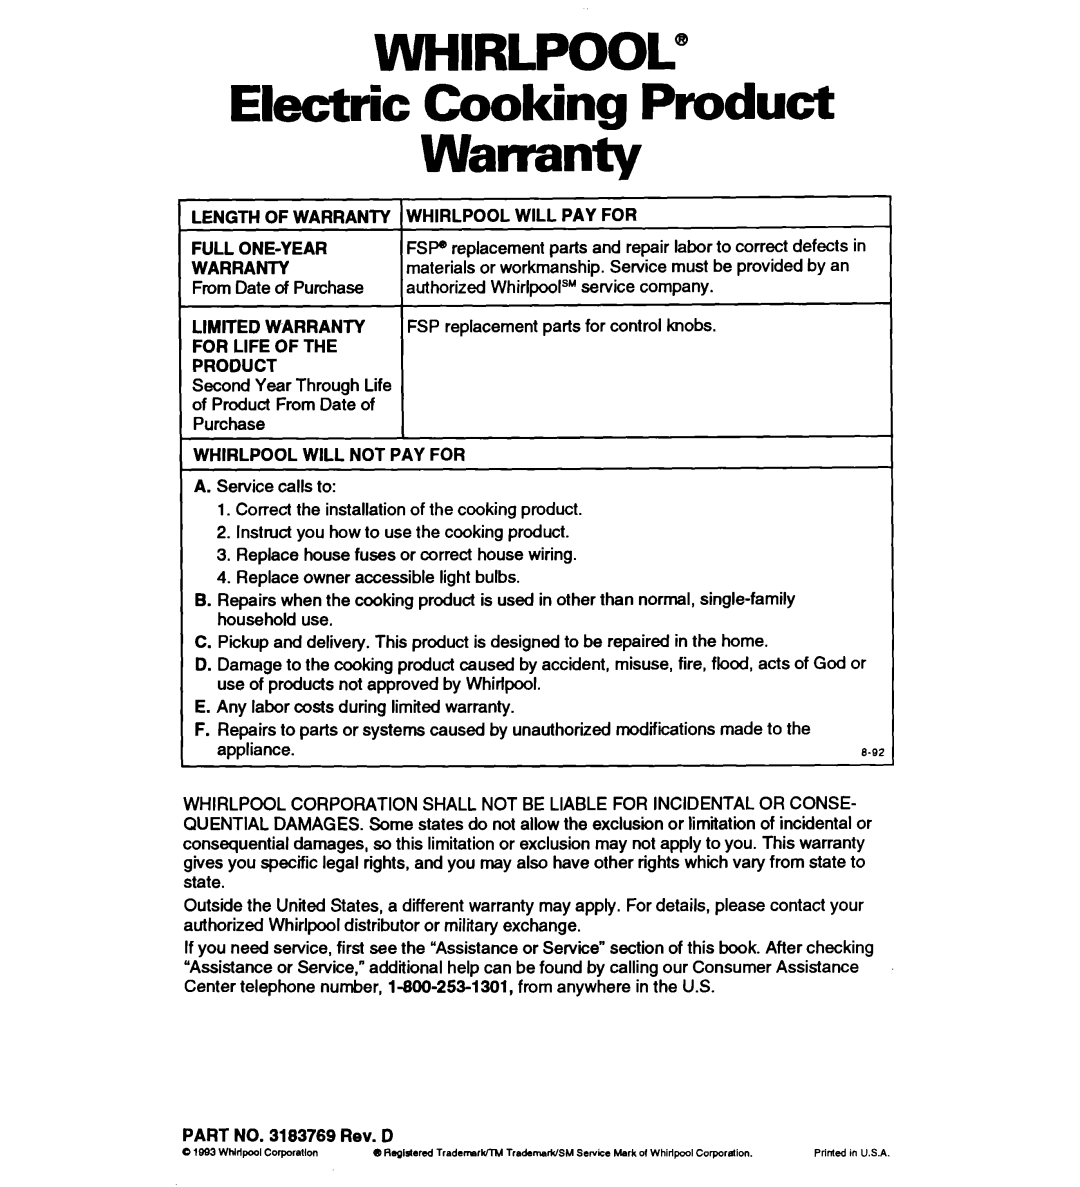 Whirlpool RS677PX WHIRLPOOL@ Electric Cooking Product Warranty, LlMllED WARRANTY FOR LIFE OF THE PRODUCT 